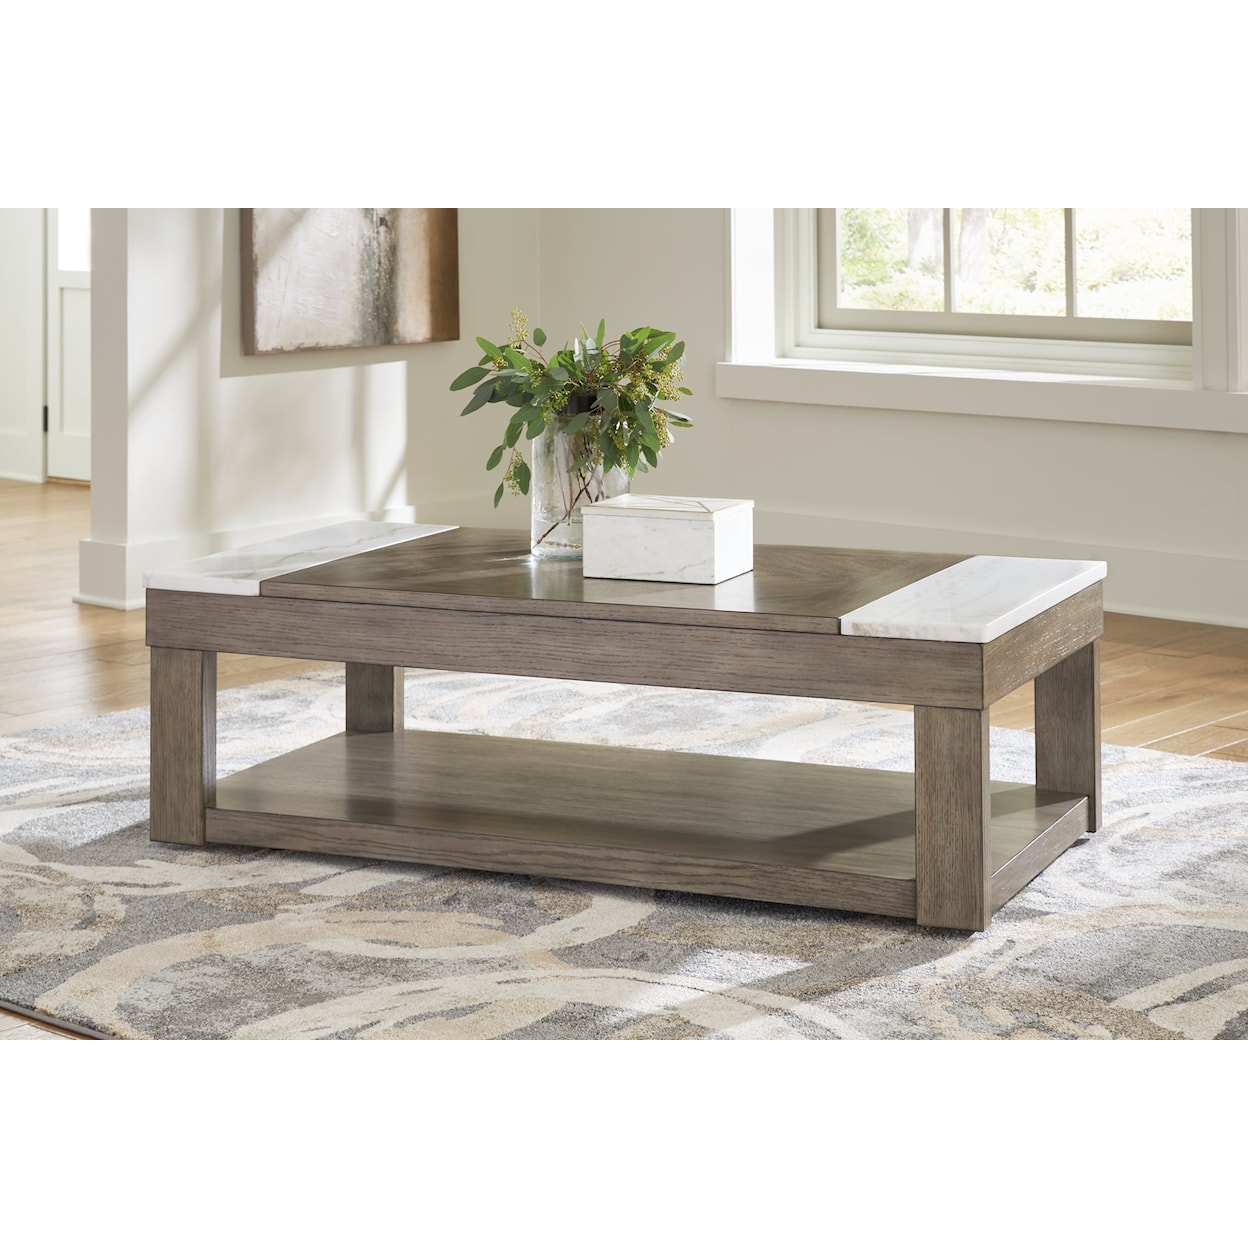 Signature Design Loyaska Lift-top Coffee Table and 2 End Tables